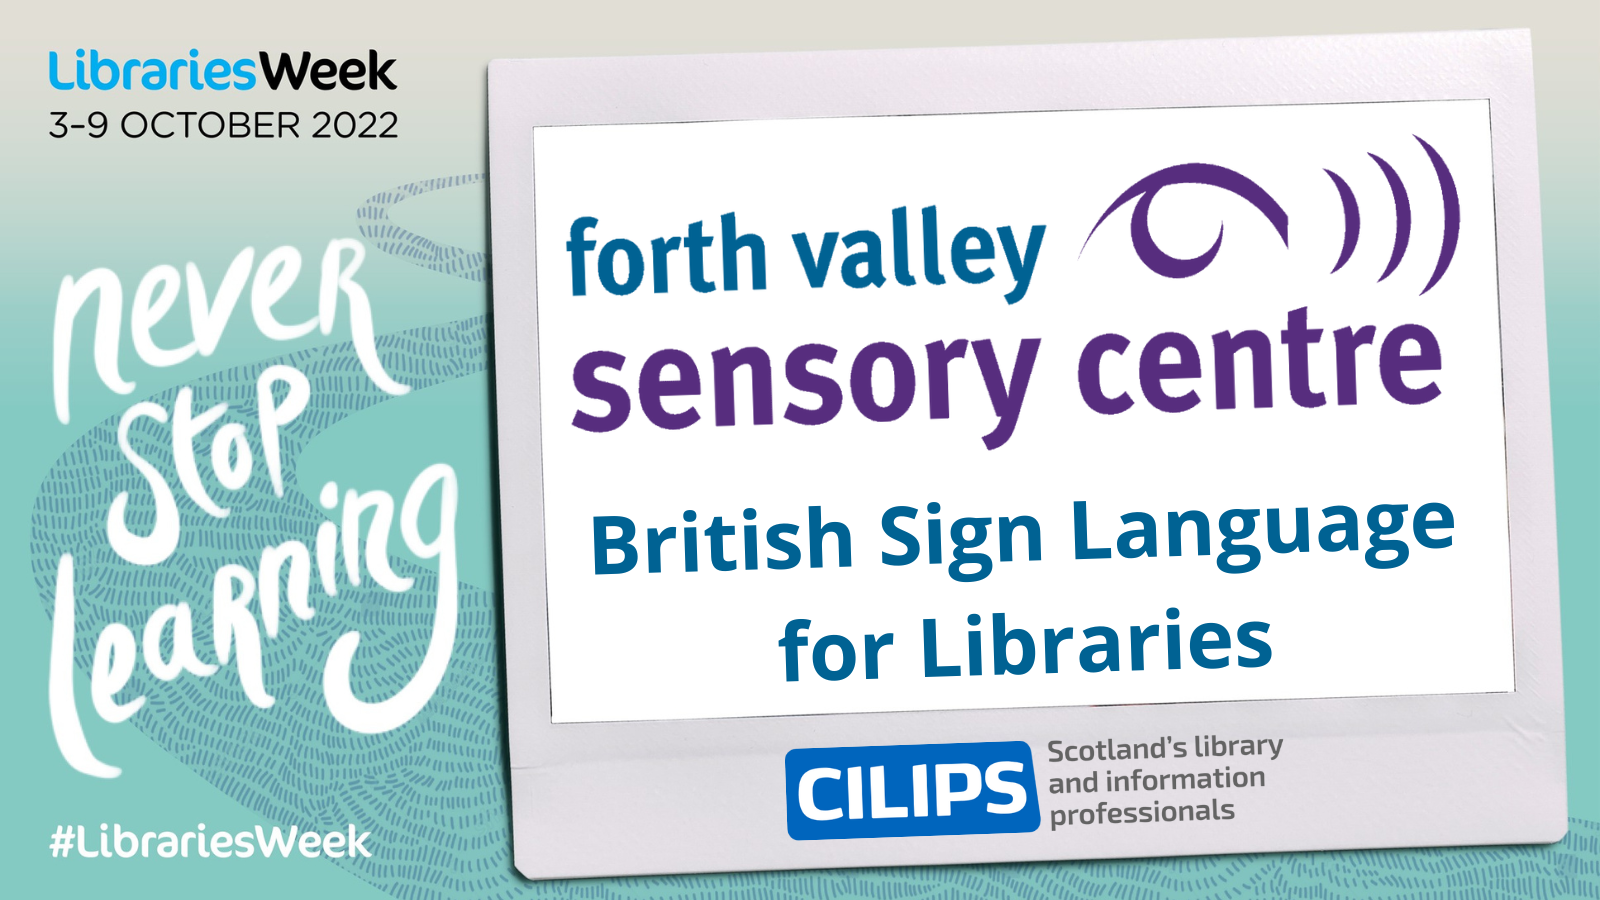 Forth Valley Sensory Centre British Sign Language for Libraries inside the Libraries Week 'never stop learning' frame.